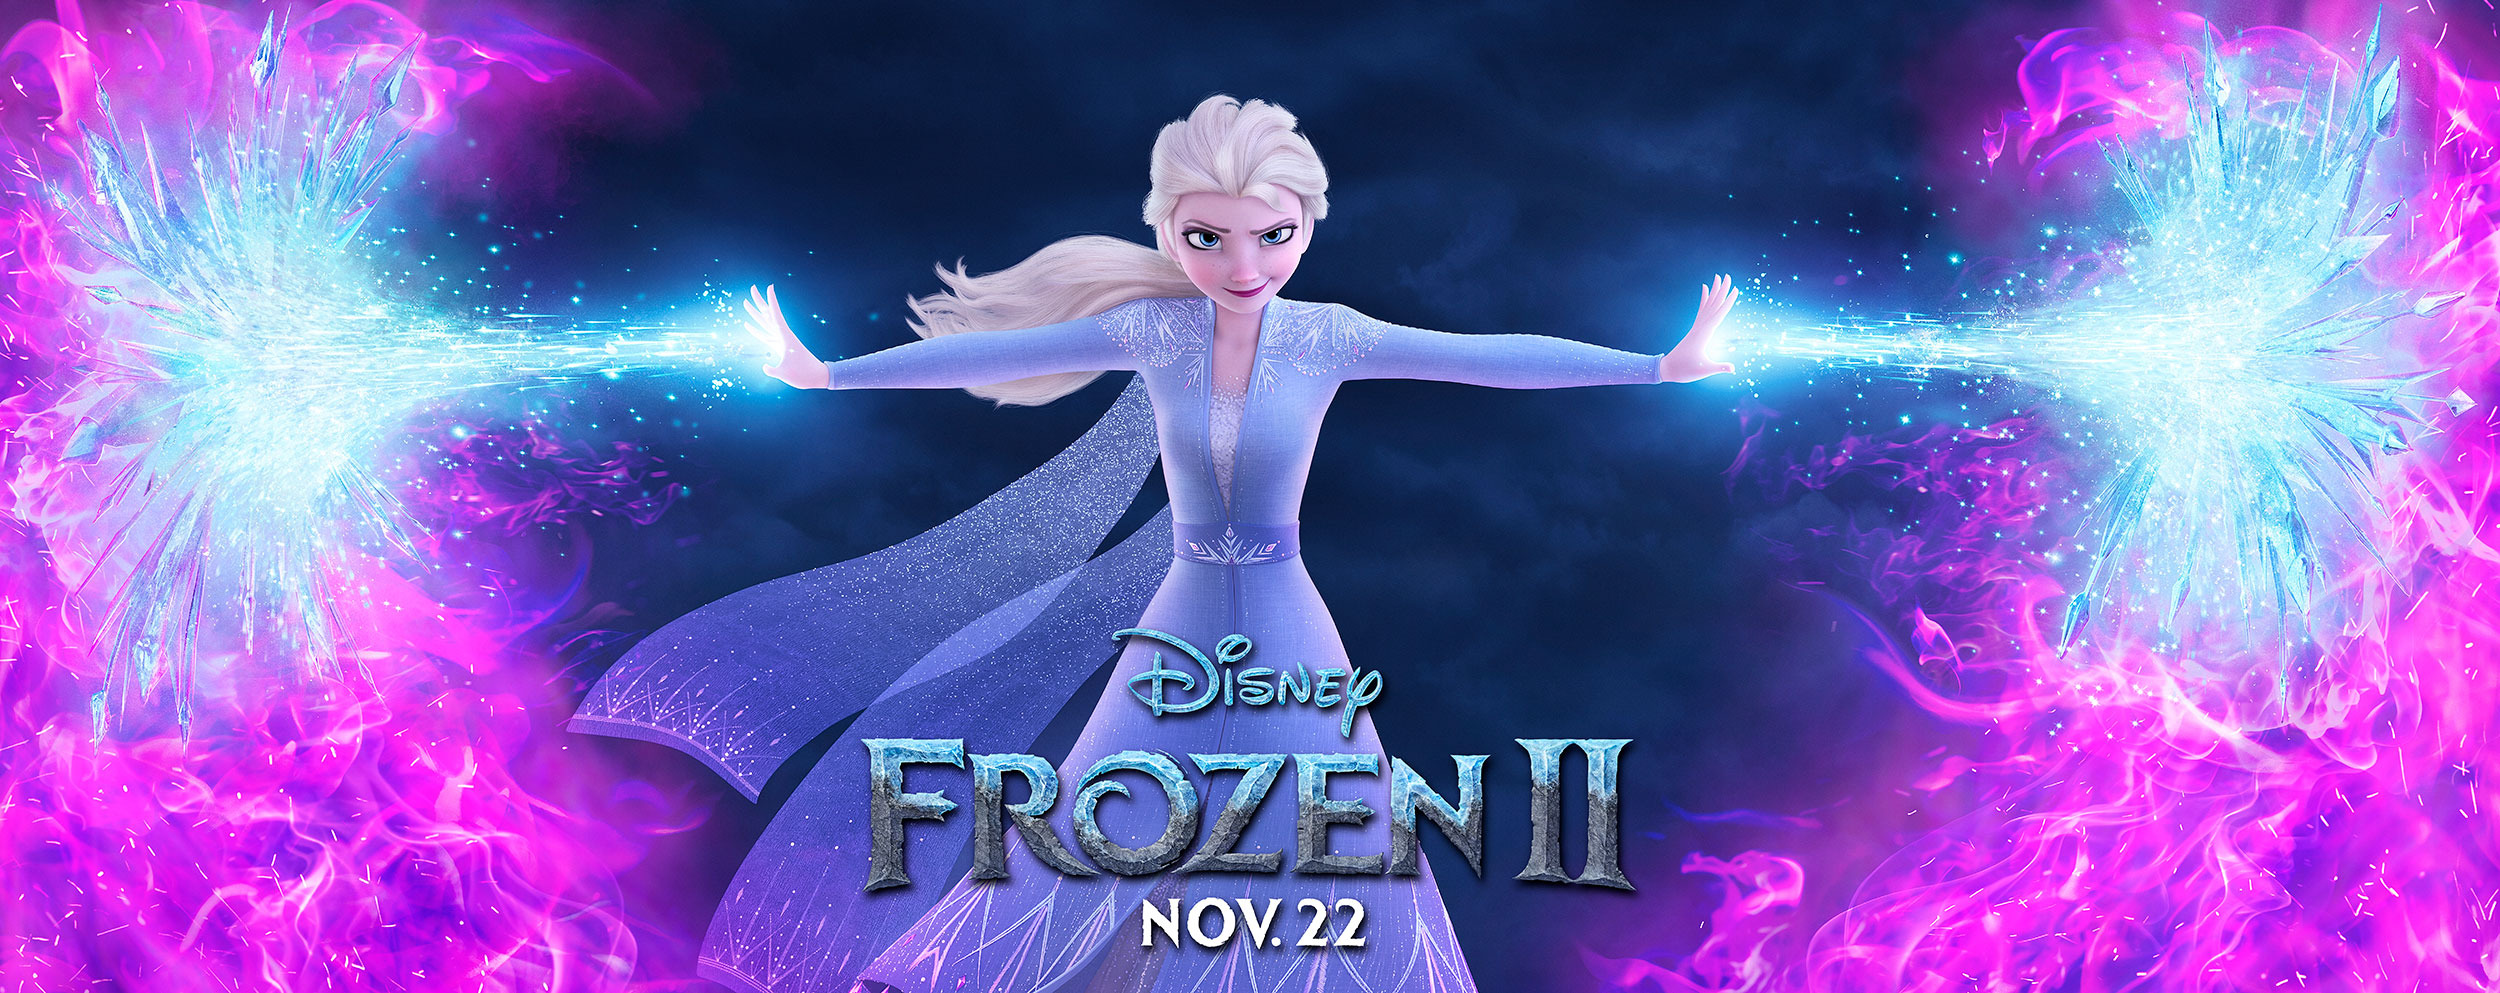 Mega Sized Movie Poster Image for Frozen 2 (#31 of 31)